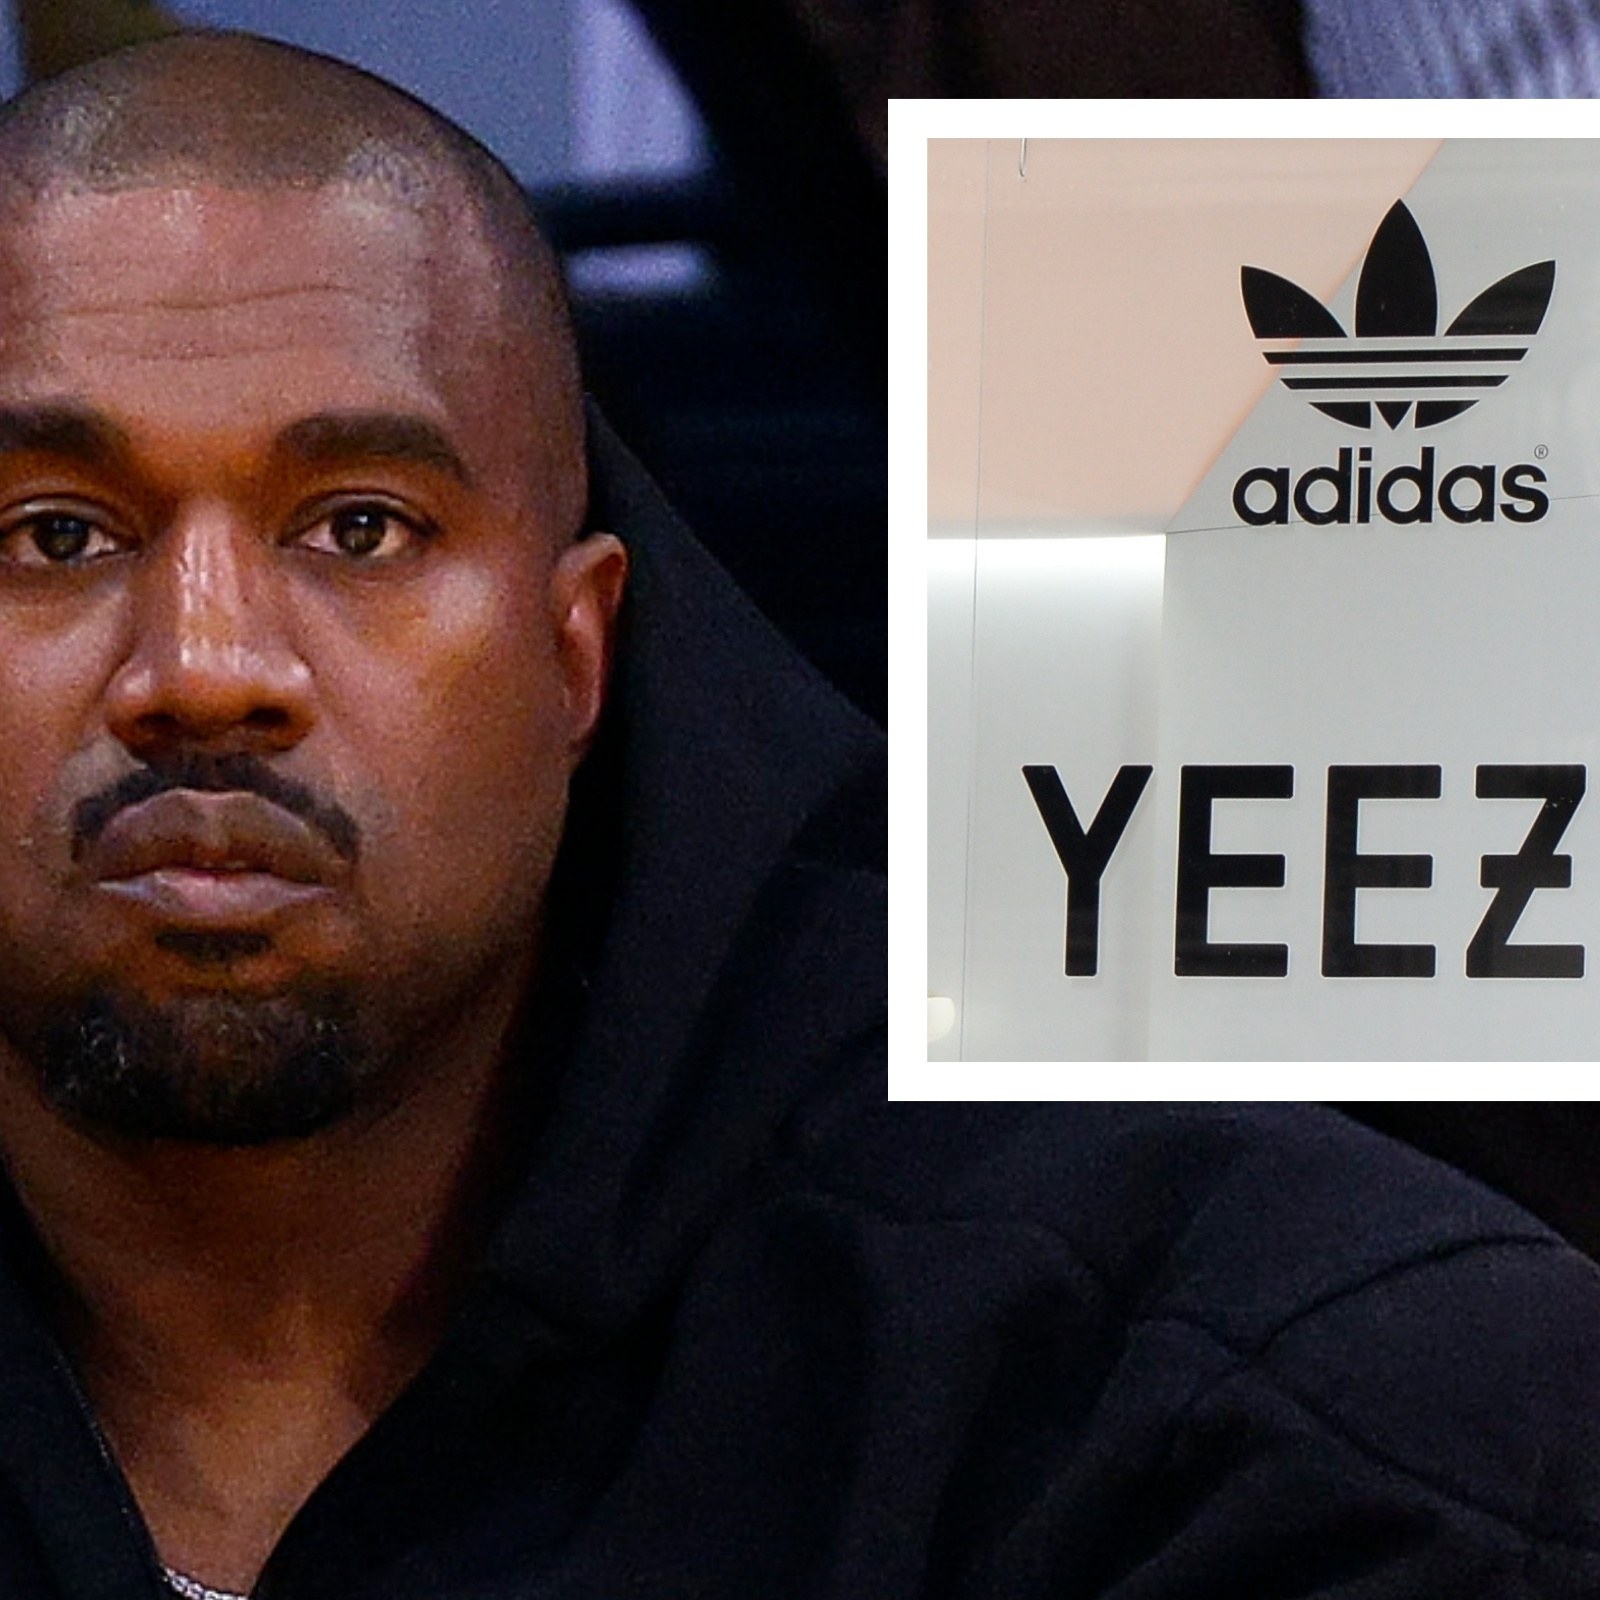 Politiebureau banner insluiten What's Next for Kanye West's Yeezy Brand as Adidas Copyright Feud Continues